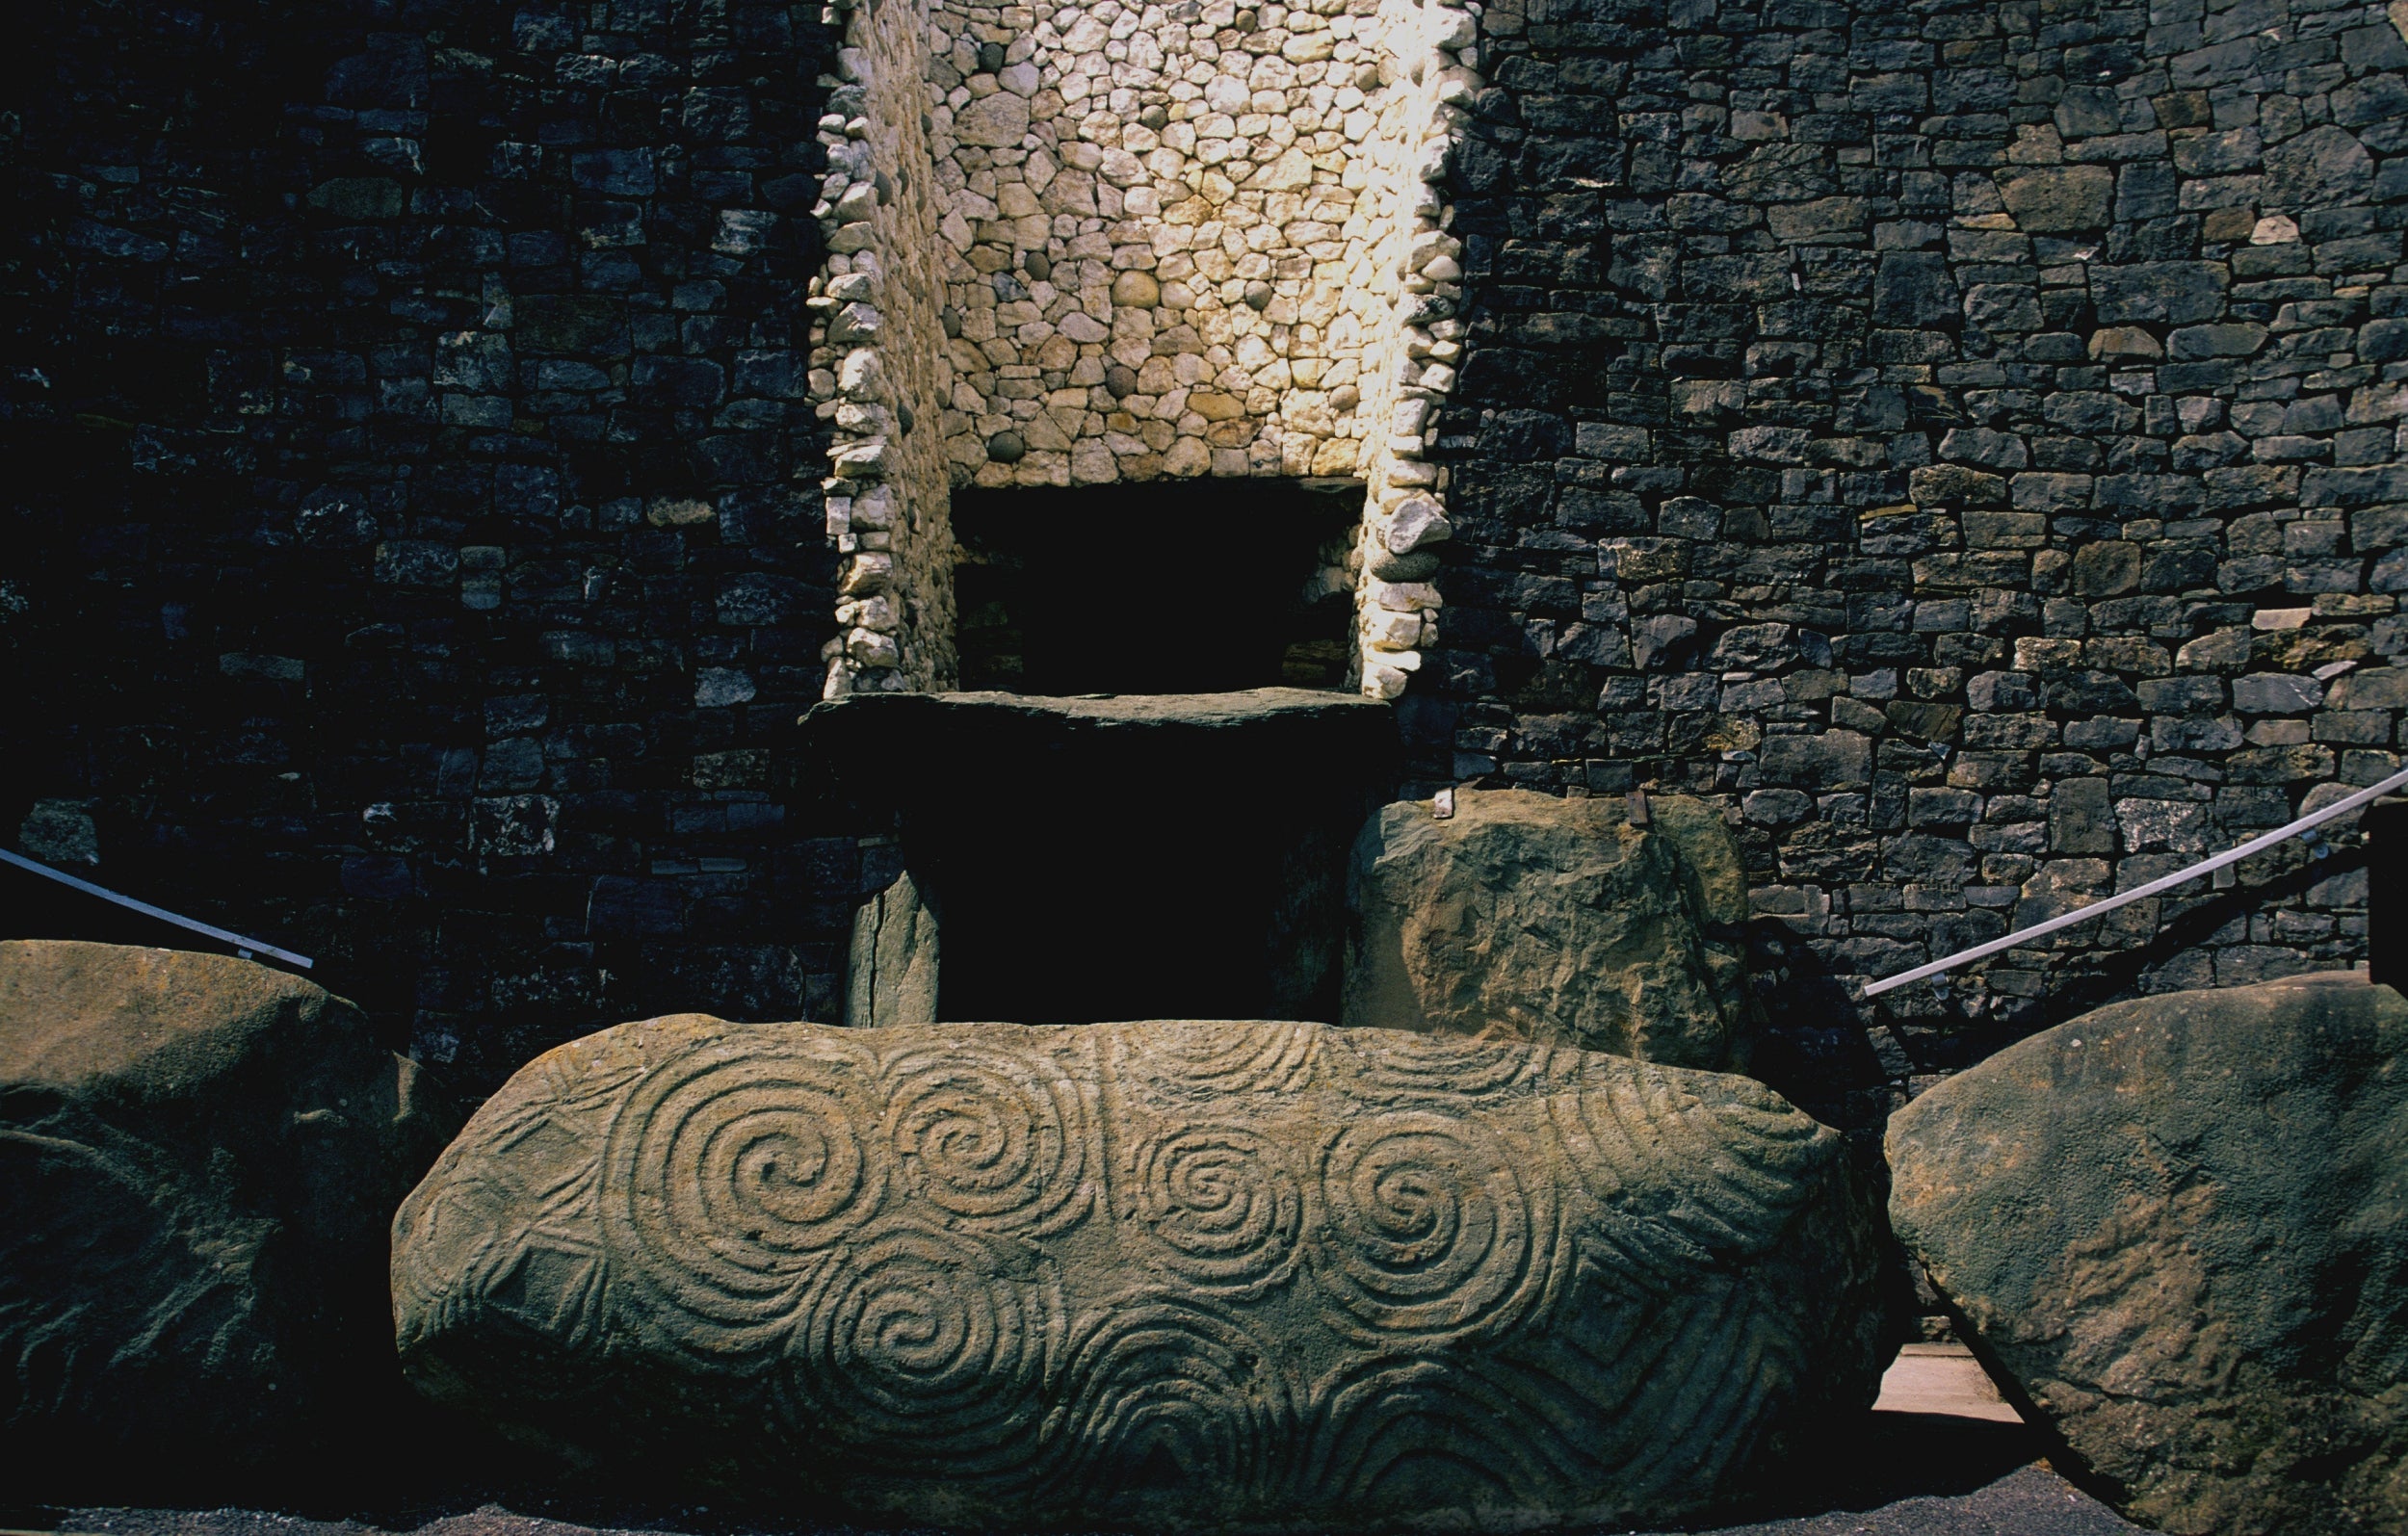 Parts of Newgrange were built to align with the sun during the summer and winter solstices